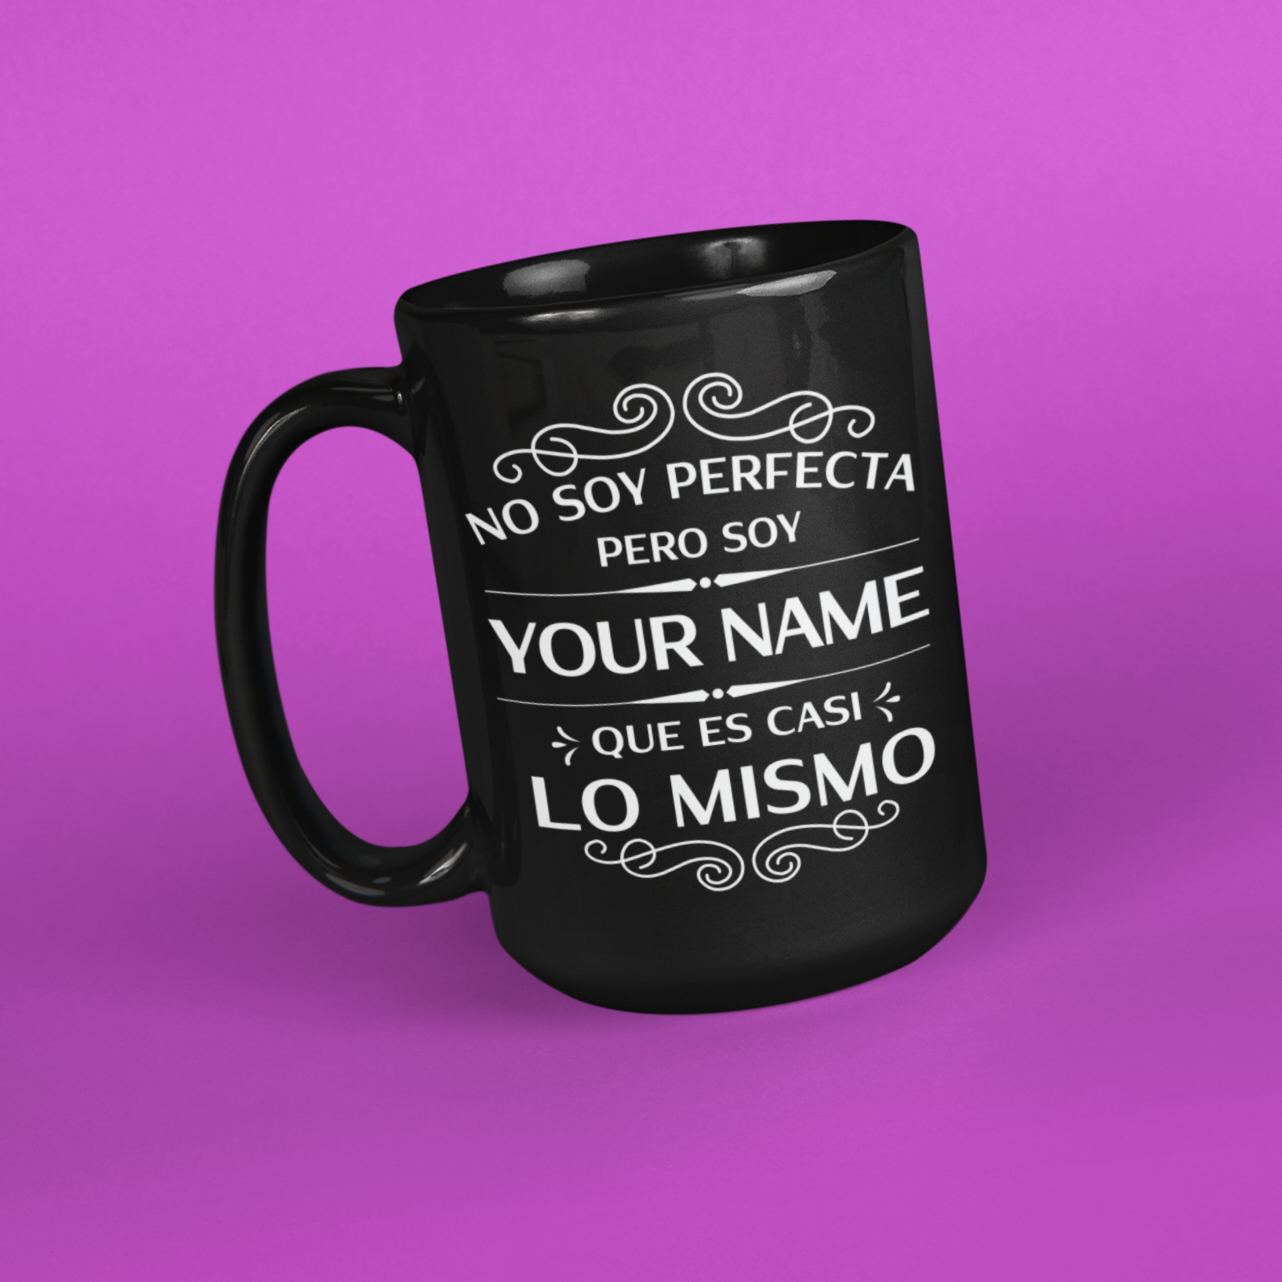 angled version of a tall black mug for Latinas and Spanish speakers. The mug can be personalized to add someones last name (Apellido). In white lettering, the mug says "no soy perfecta, pero soy 'your name' que es casi lo mismo'